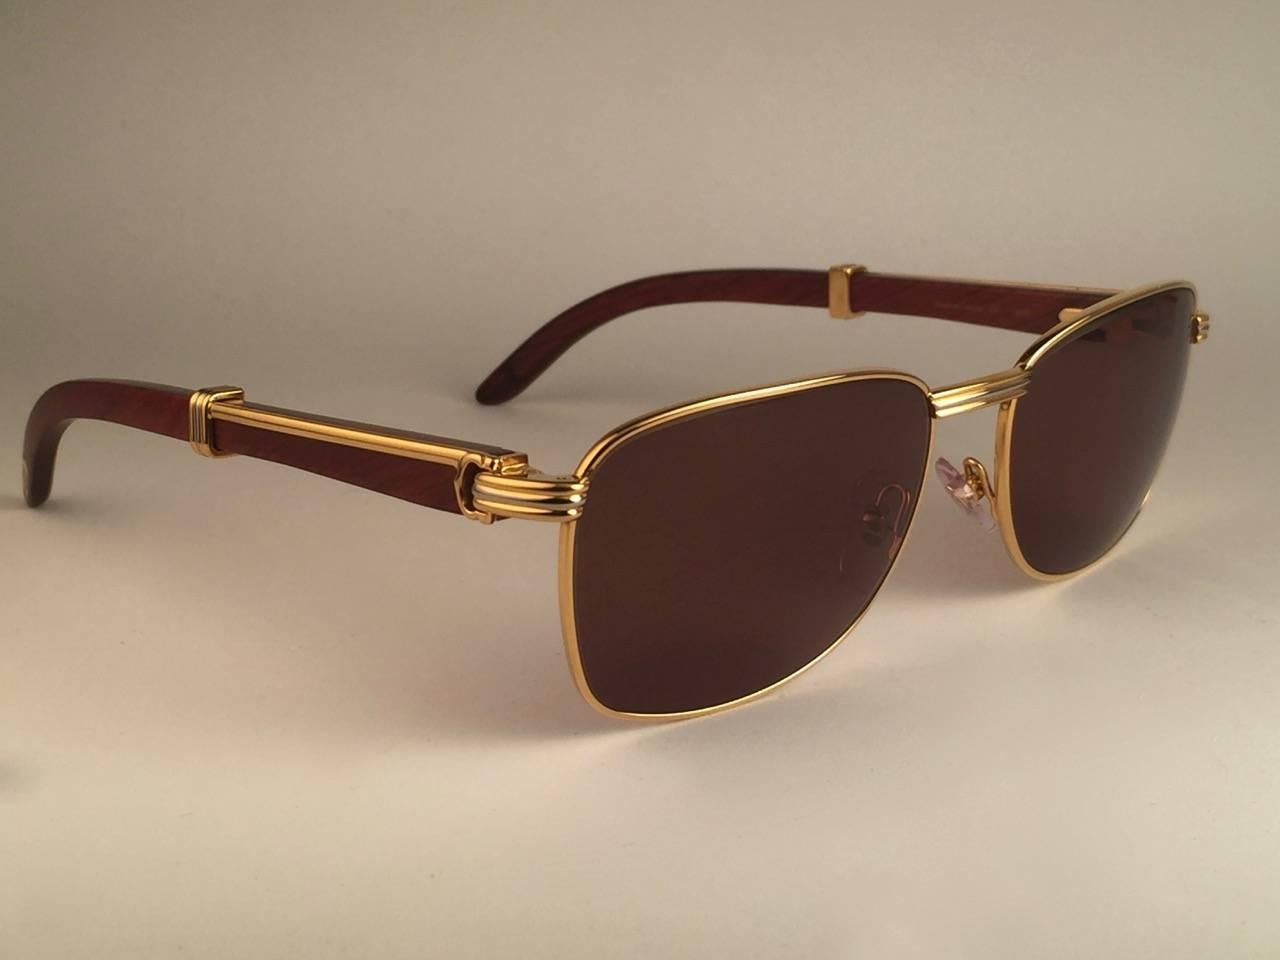 New 1990 Cartier Full Set Amboise Bubinga Hardwood Sunglasses with new solid honey brown (uv protection) lenses. 
Frame is with the front and sides in yellow and white gold and has the famous wood & gold accents temples. 
Amazing craftsmanship! All